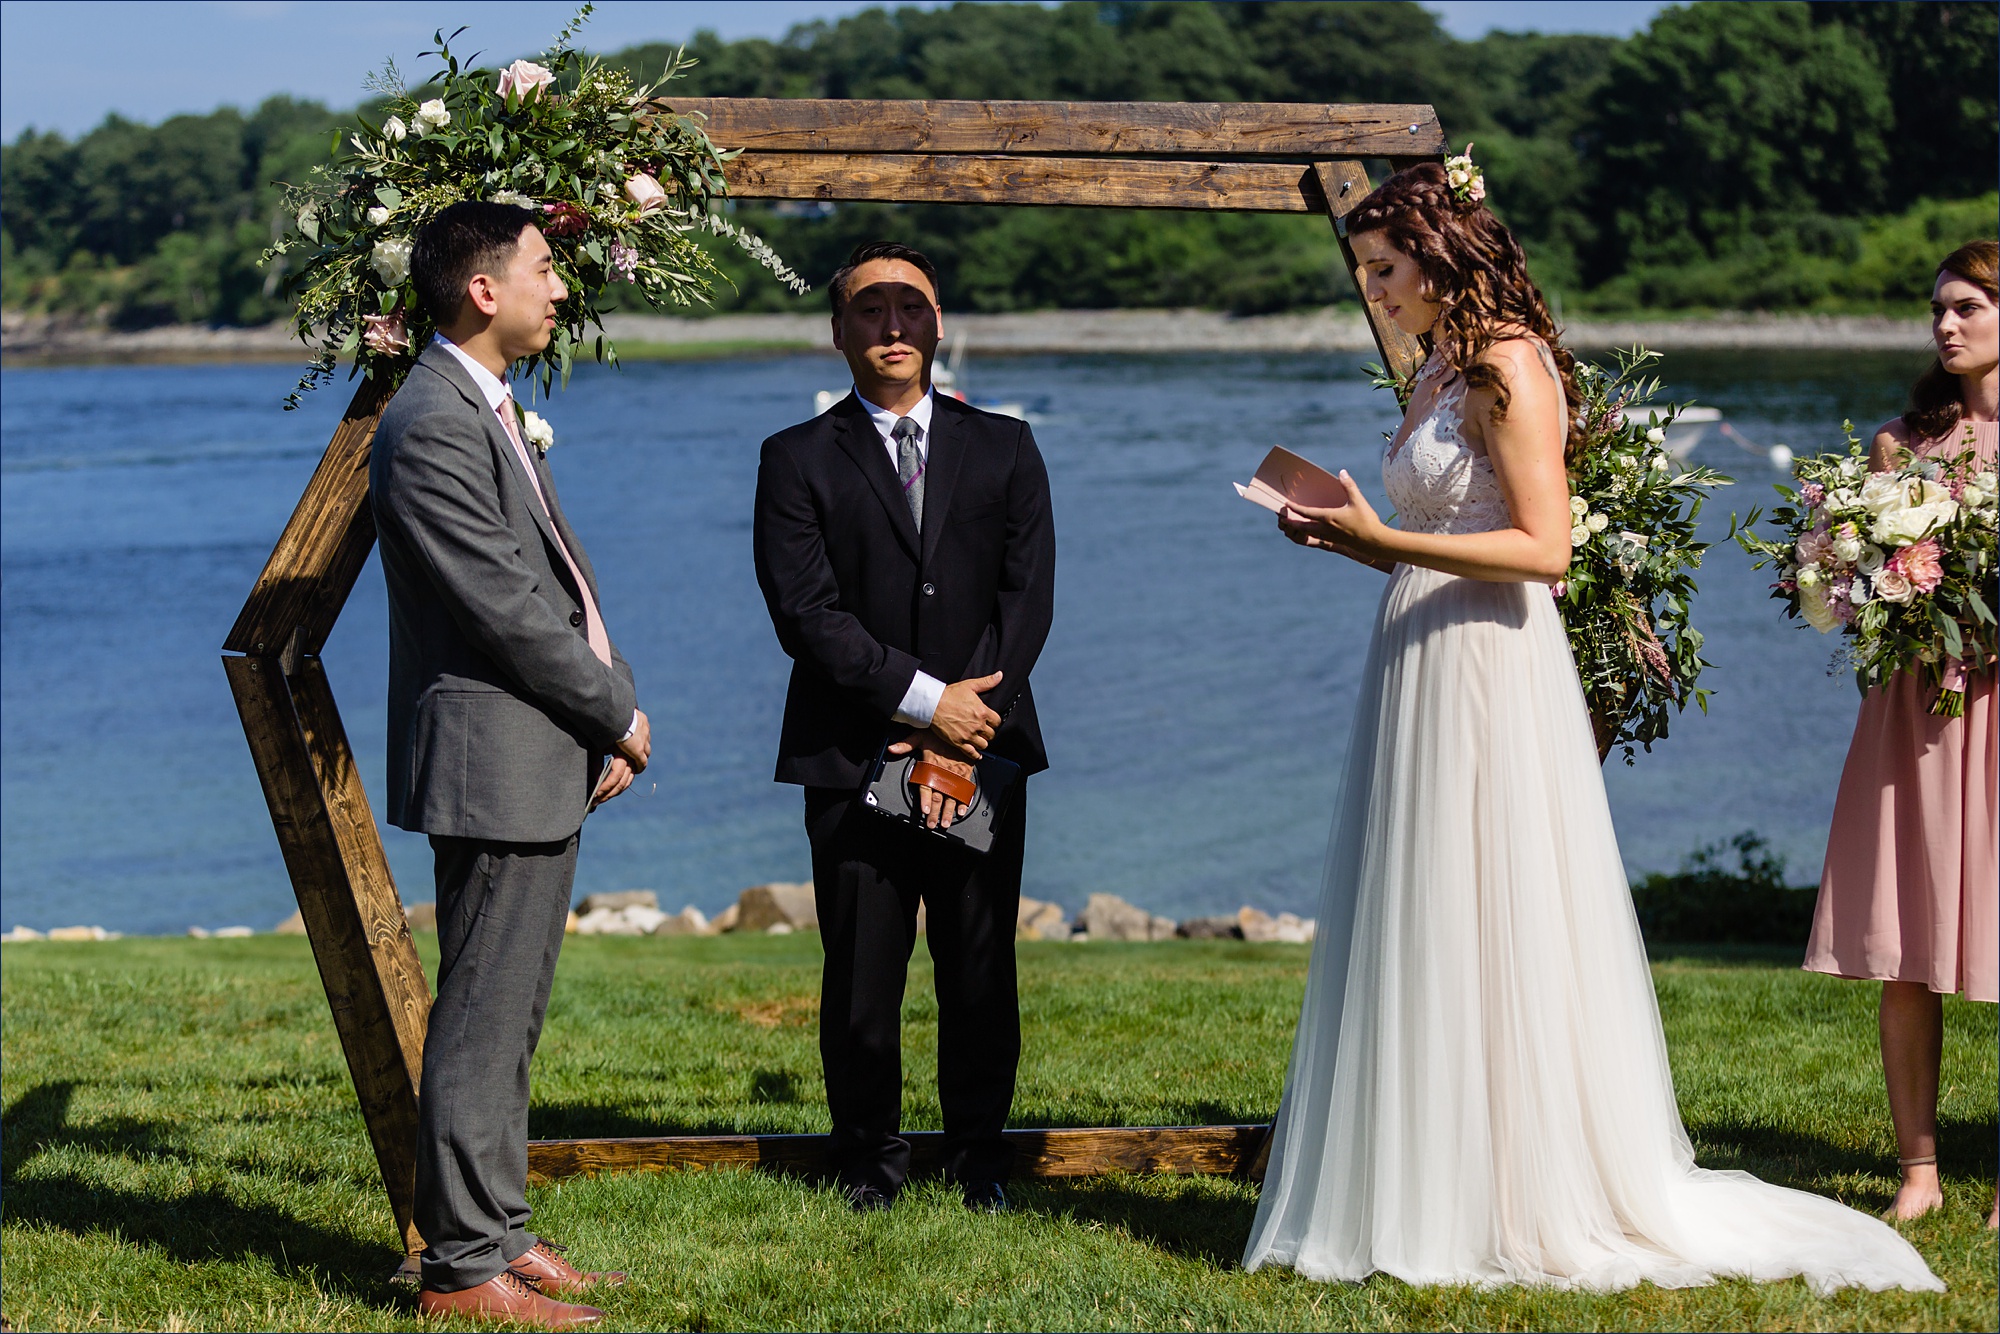 The bride and groom read their vows to one another at their York Maine Wedding